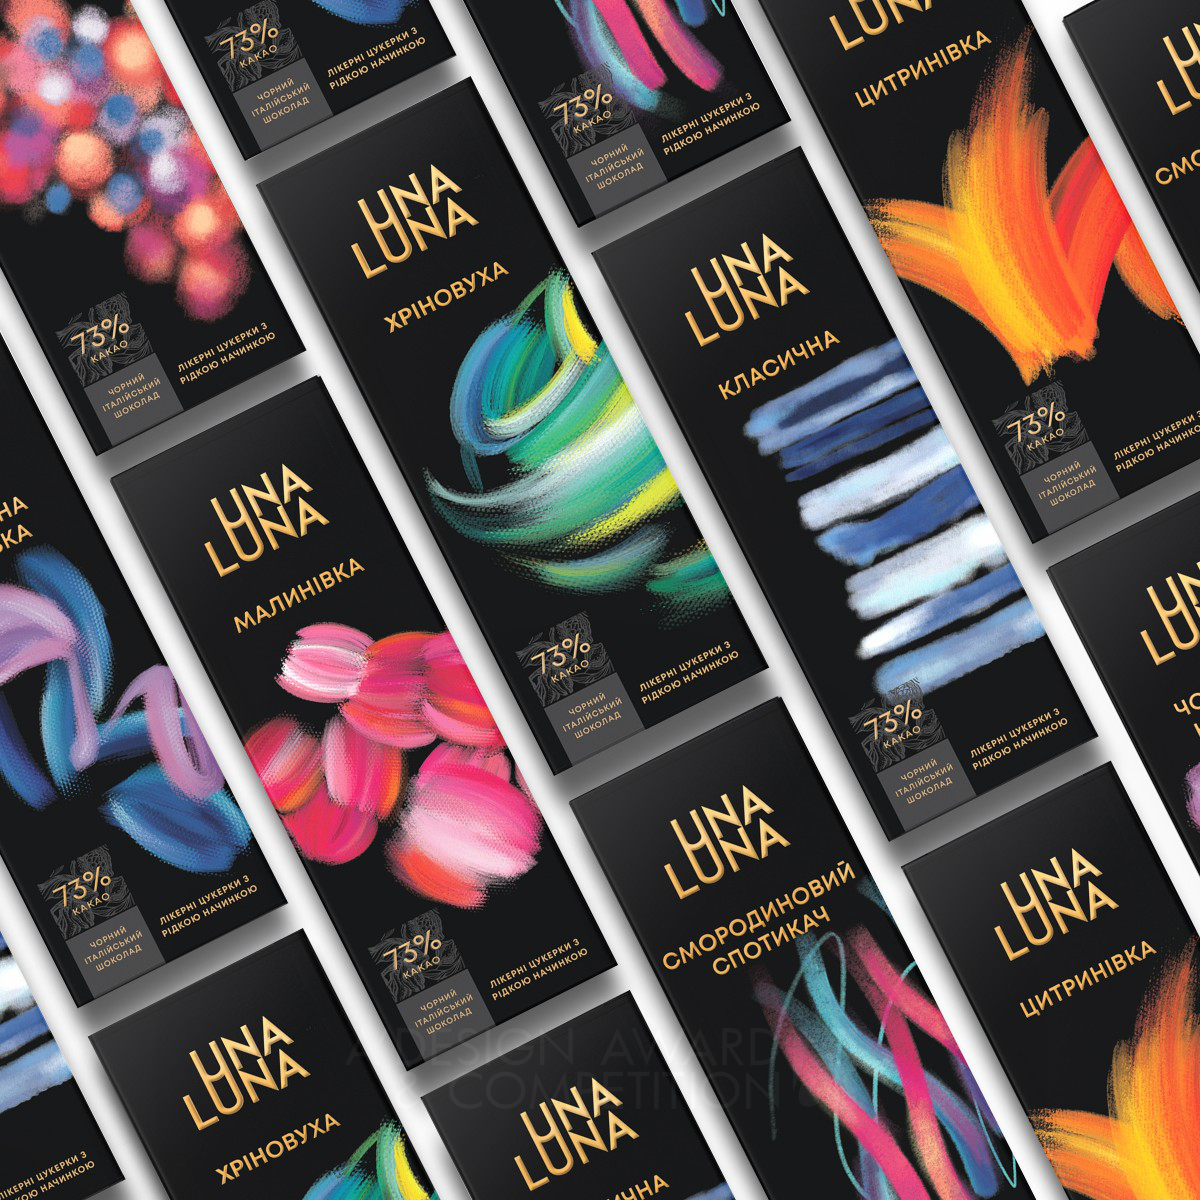 Una Luna Collection Candy Packaging by Olha Takhtarova